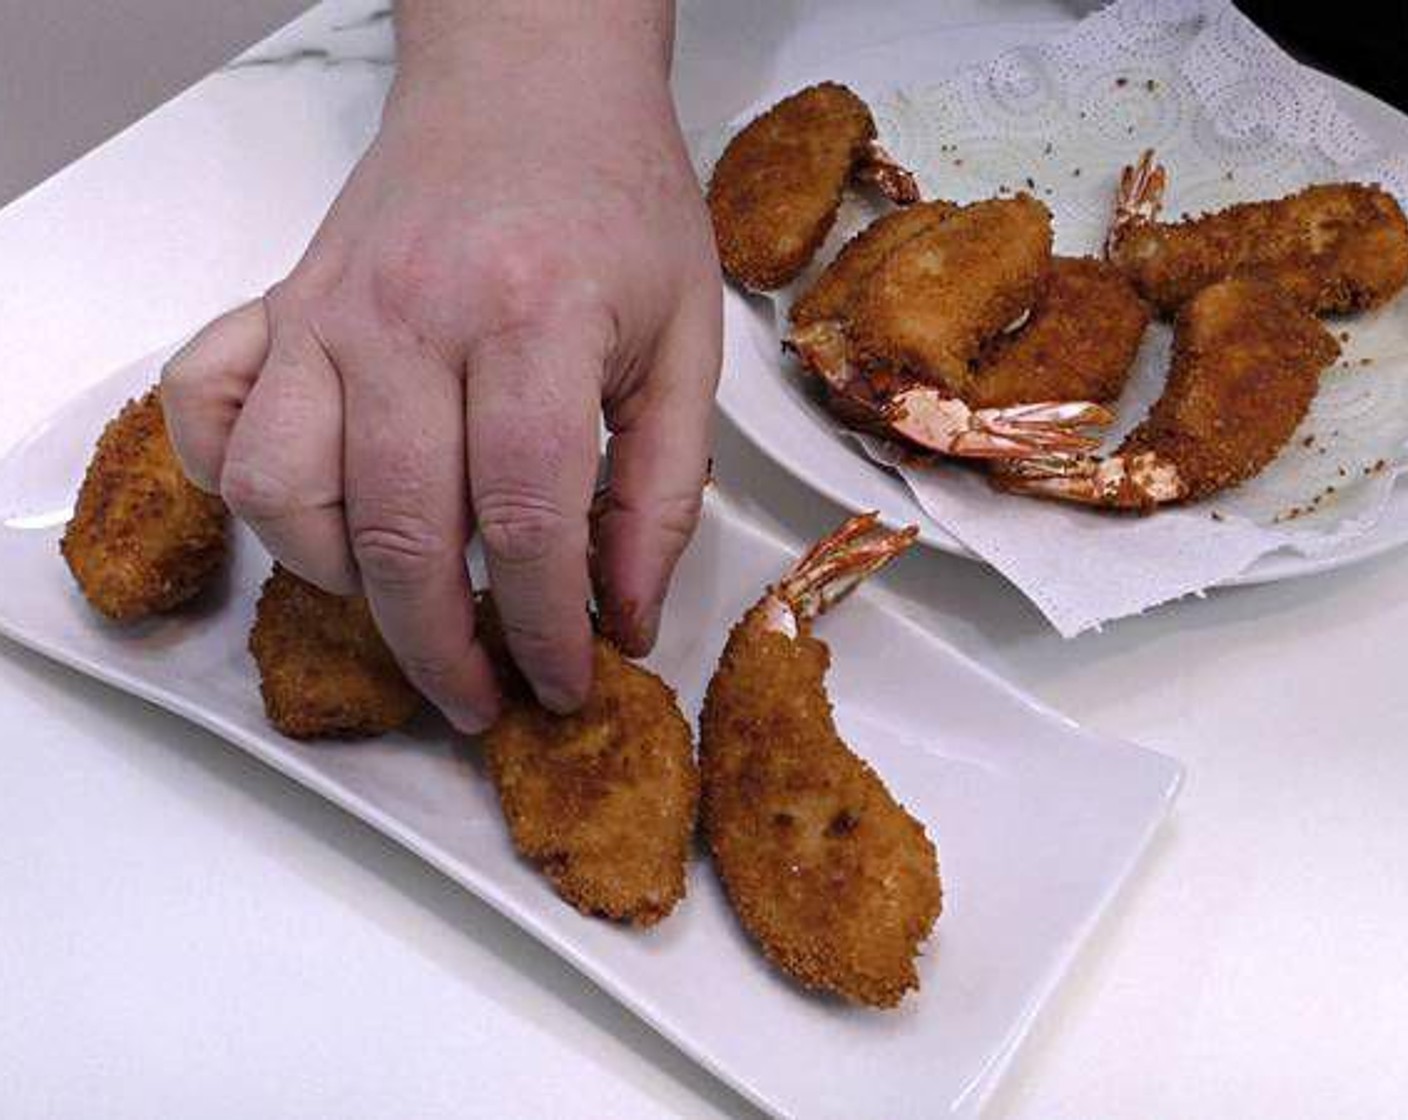 step 5 As they finish frying remove from the oil and place on a plate with paper towels to dry off excess oil.